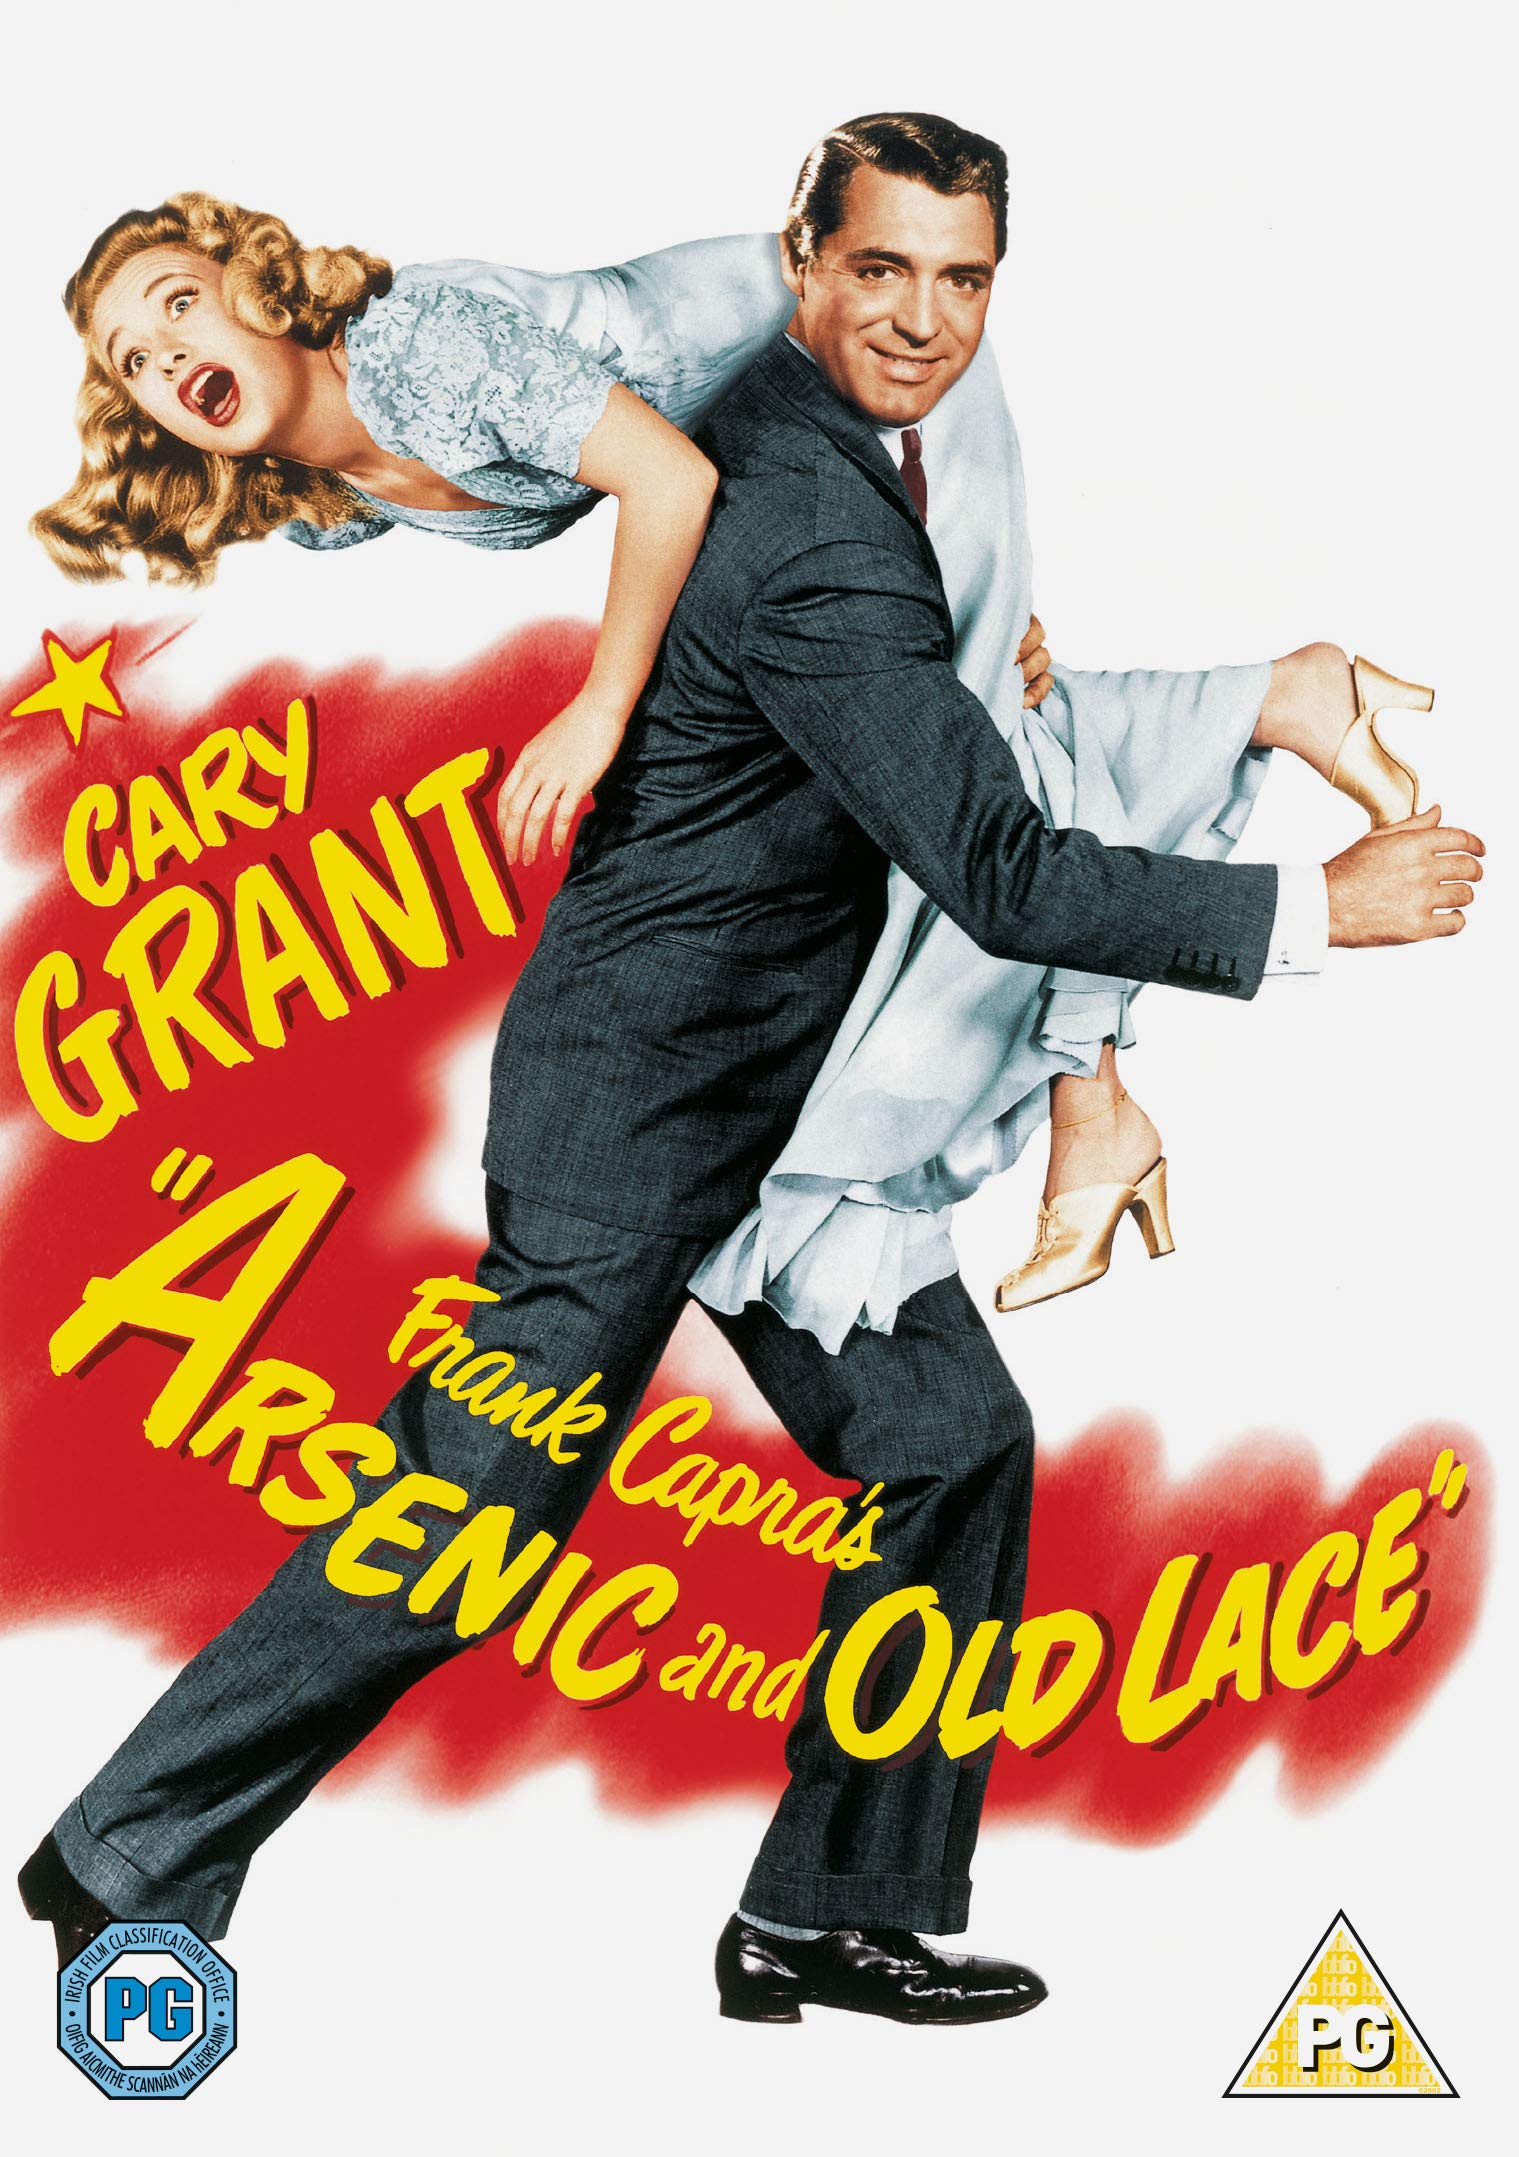 Arsenic and Old Lace [DVD] [1944] [2020]